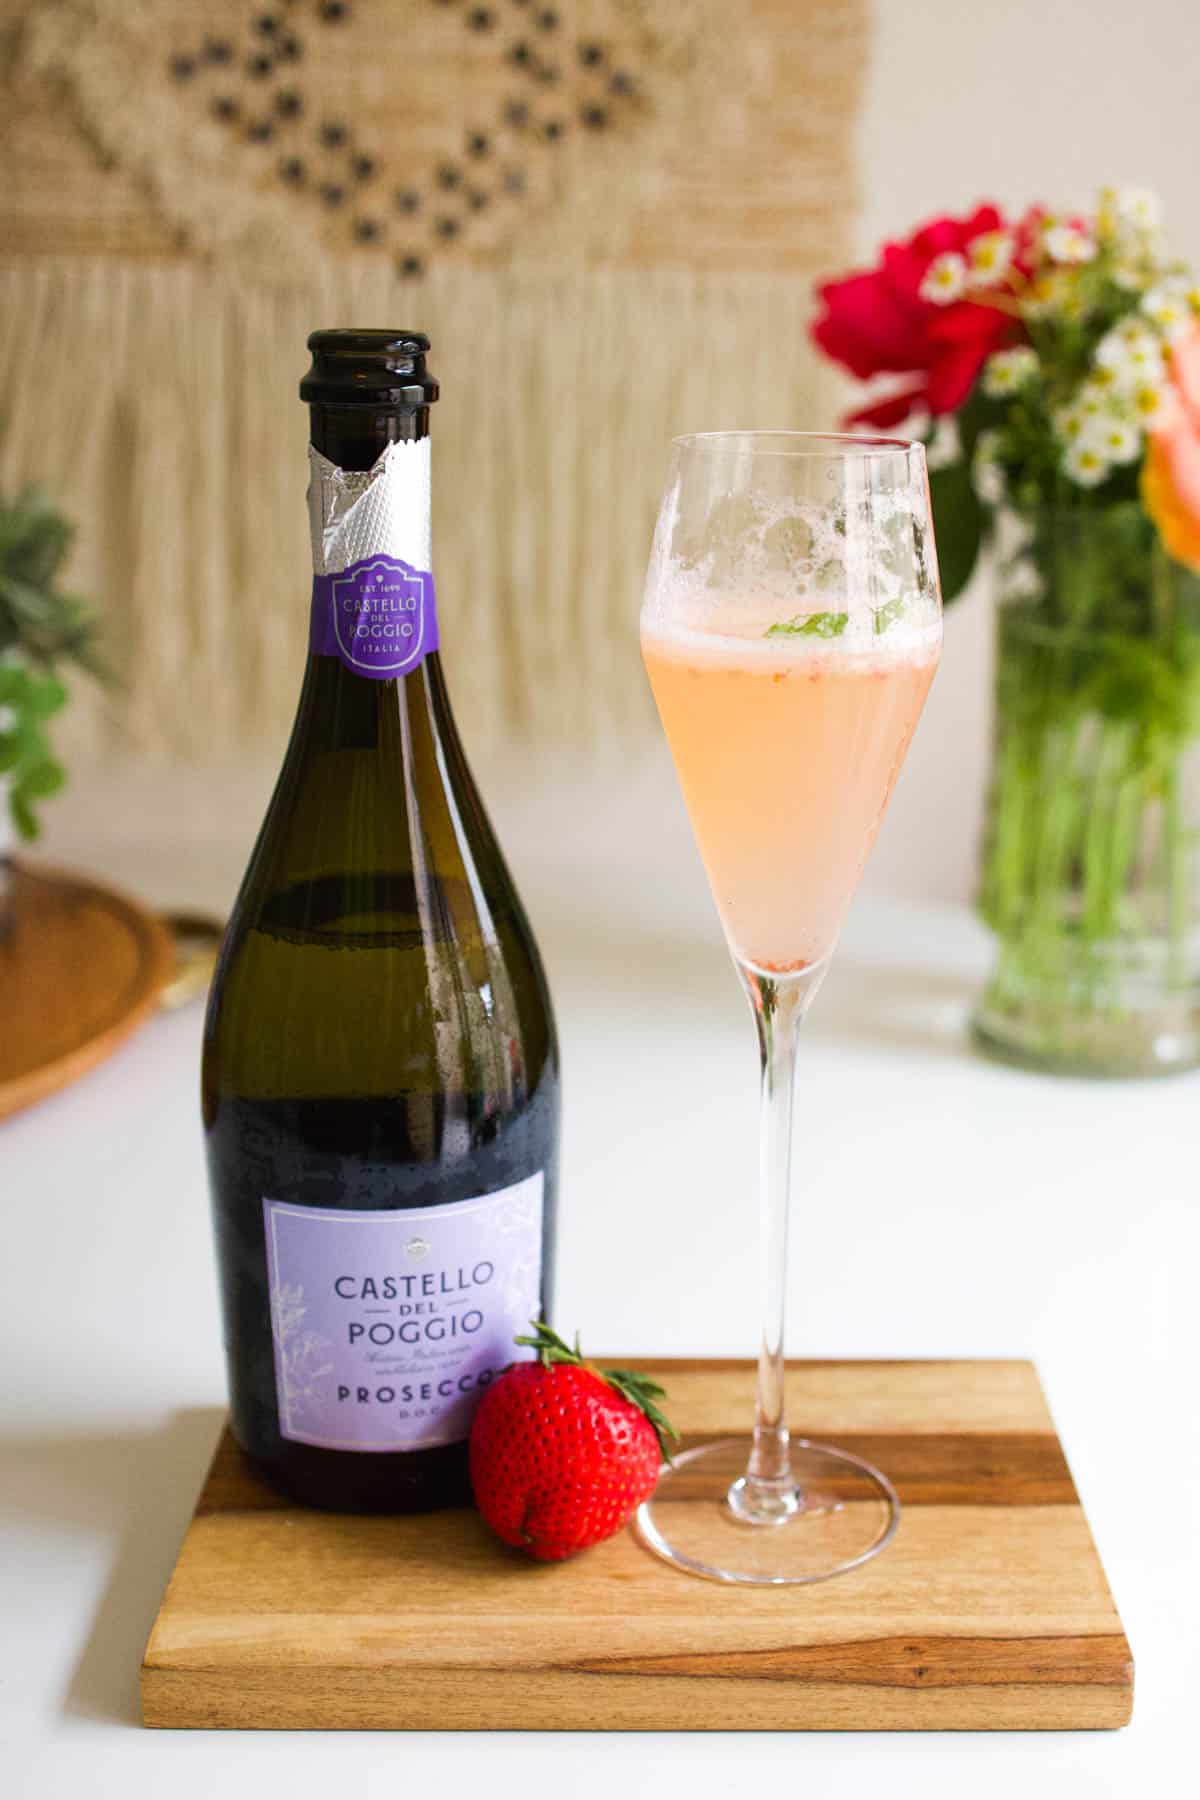 A bottle of prosecco on a wooden tray with a champagne flute with a cocktail and a fresh strawberry.